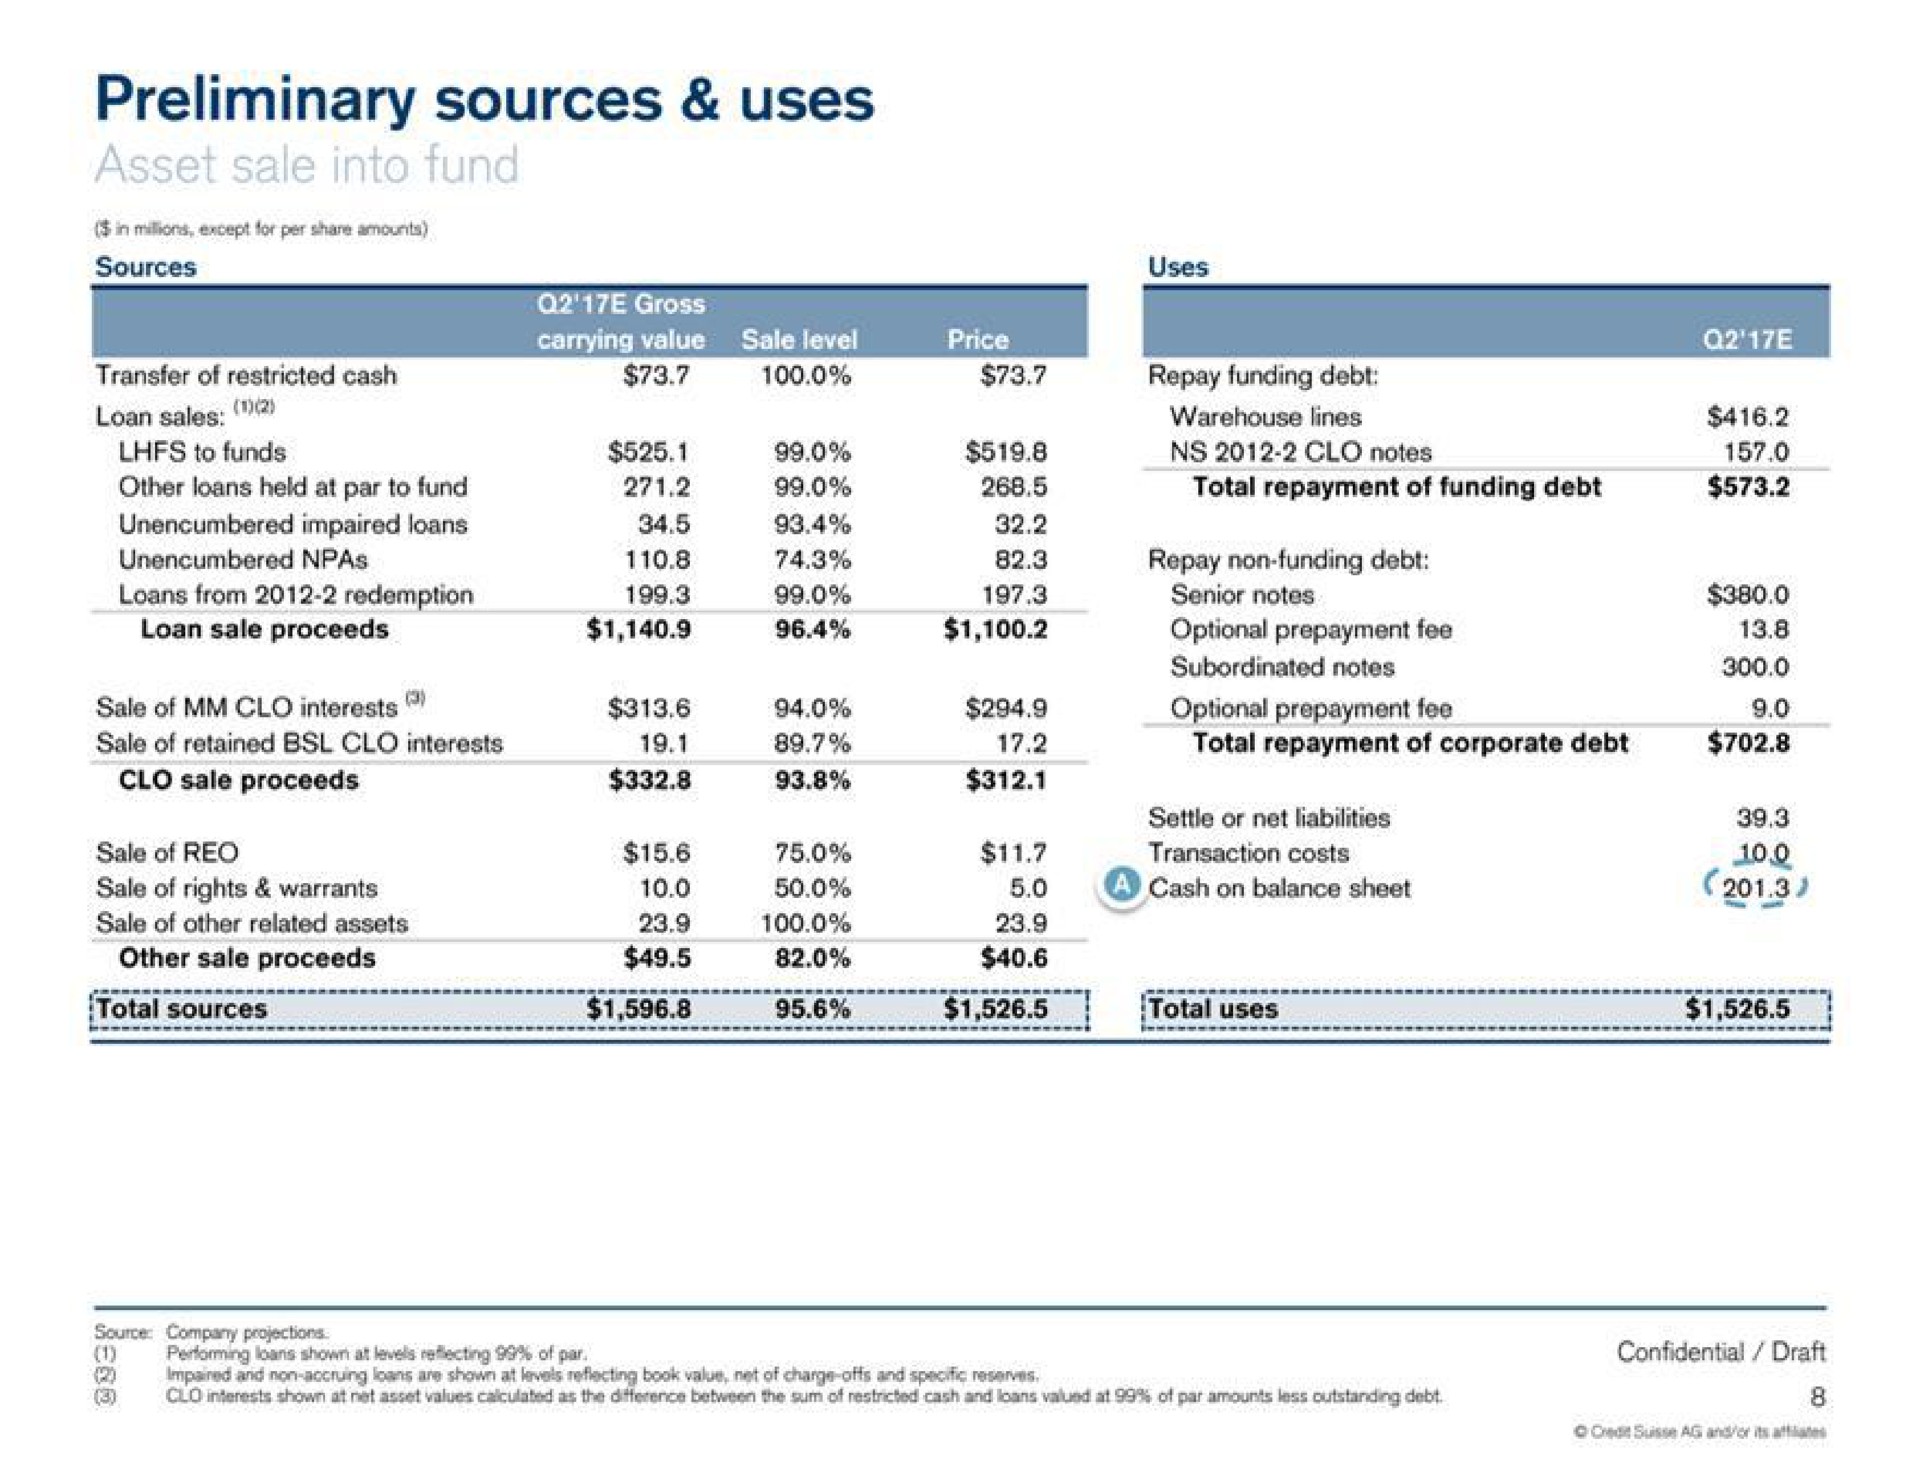 preliminary sources uses sale of other related assets total sources meal no confidential draft | Credit Suisse